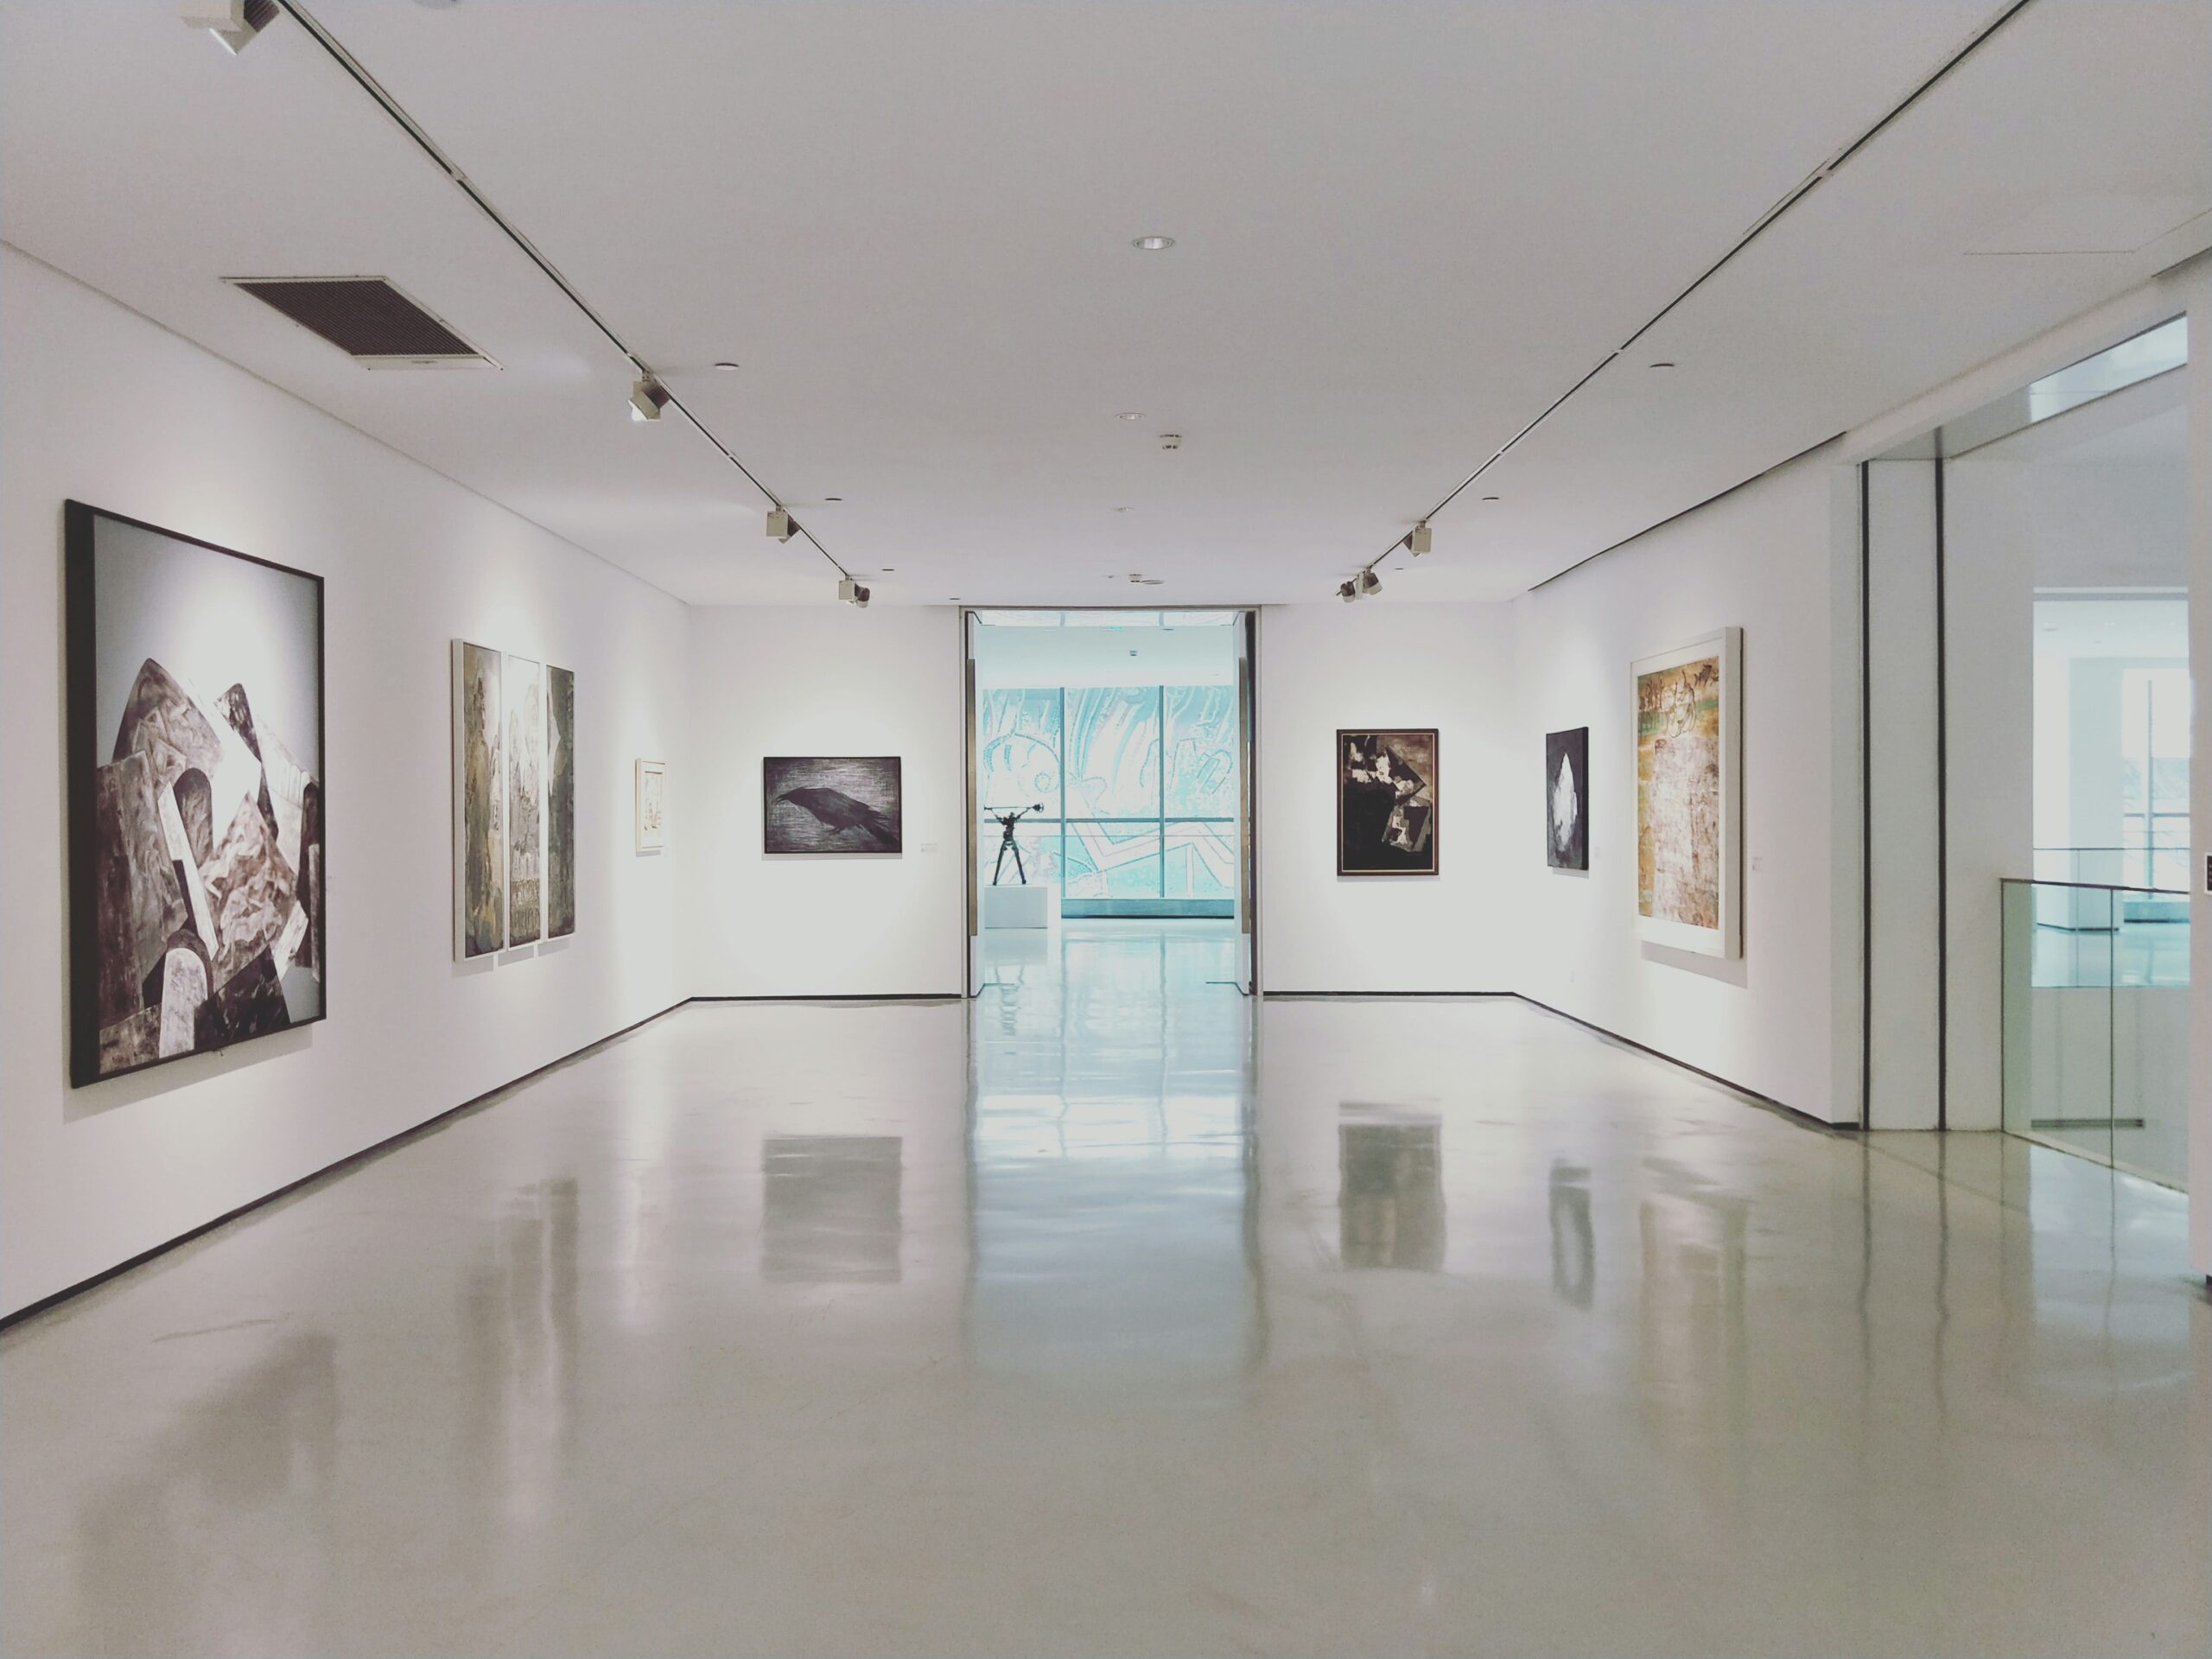 Commercial resin flooring allowing the art on the walls to stand out in a museum.